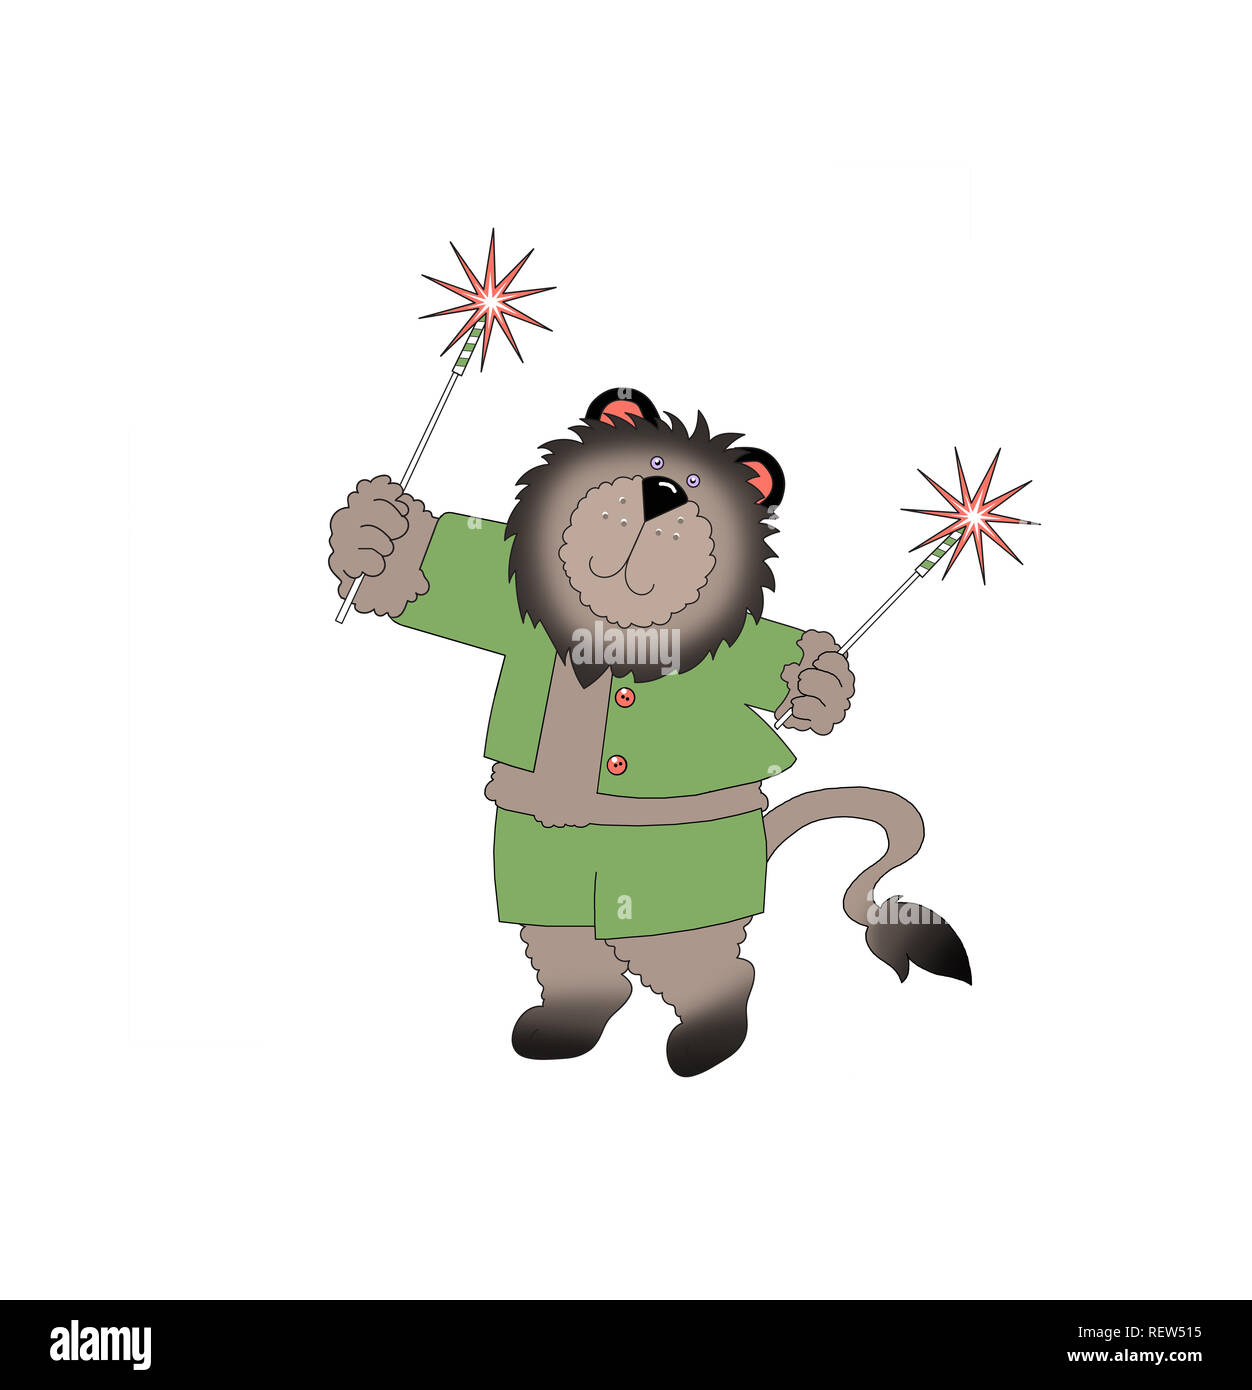 Illustration of a cute lion wearing green clothing and waving sparklers against a white background Stock Photo